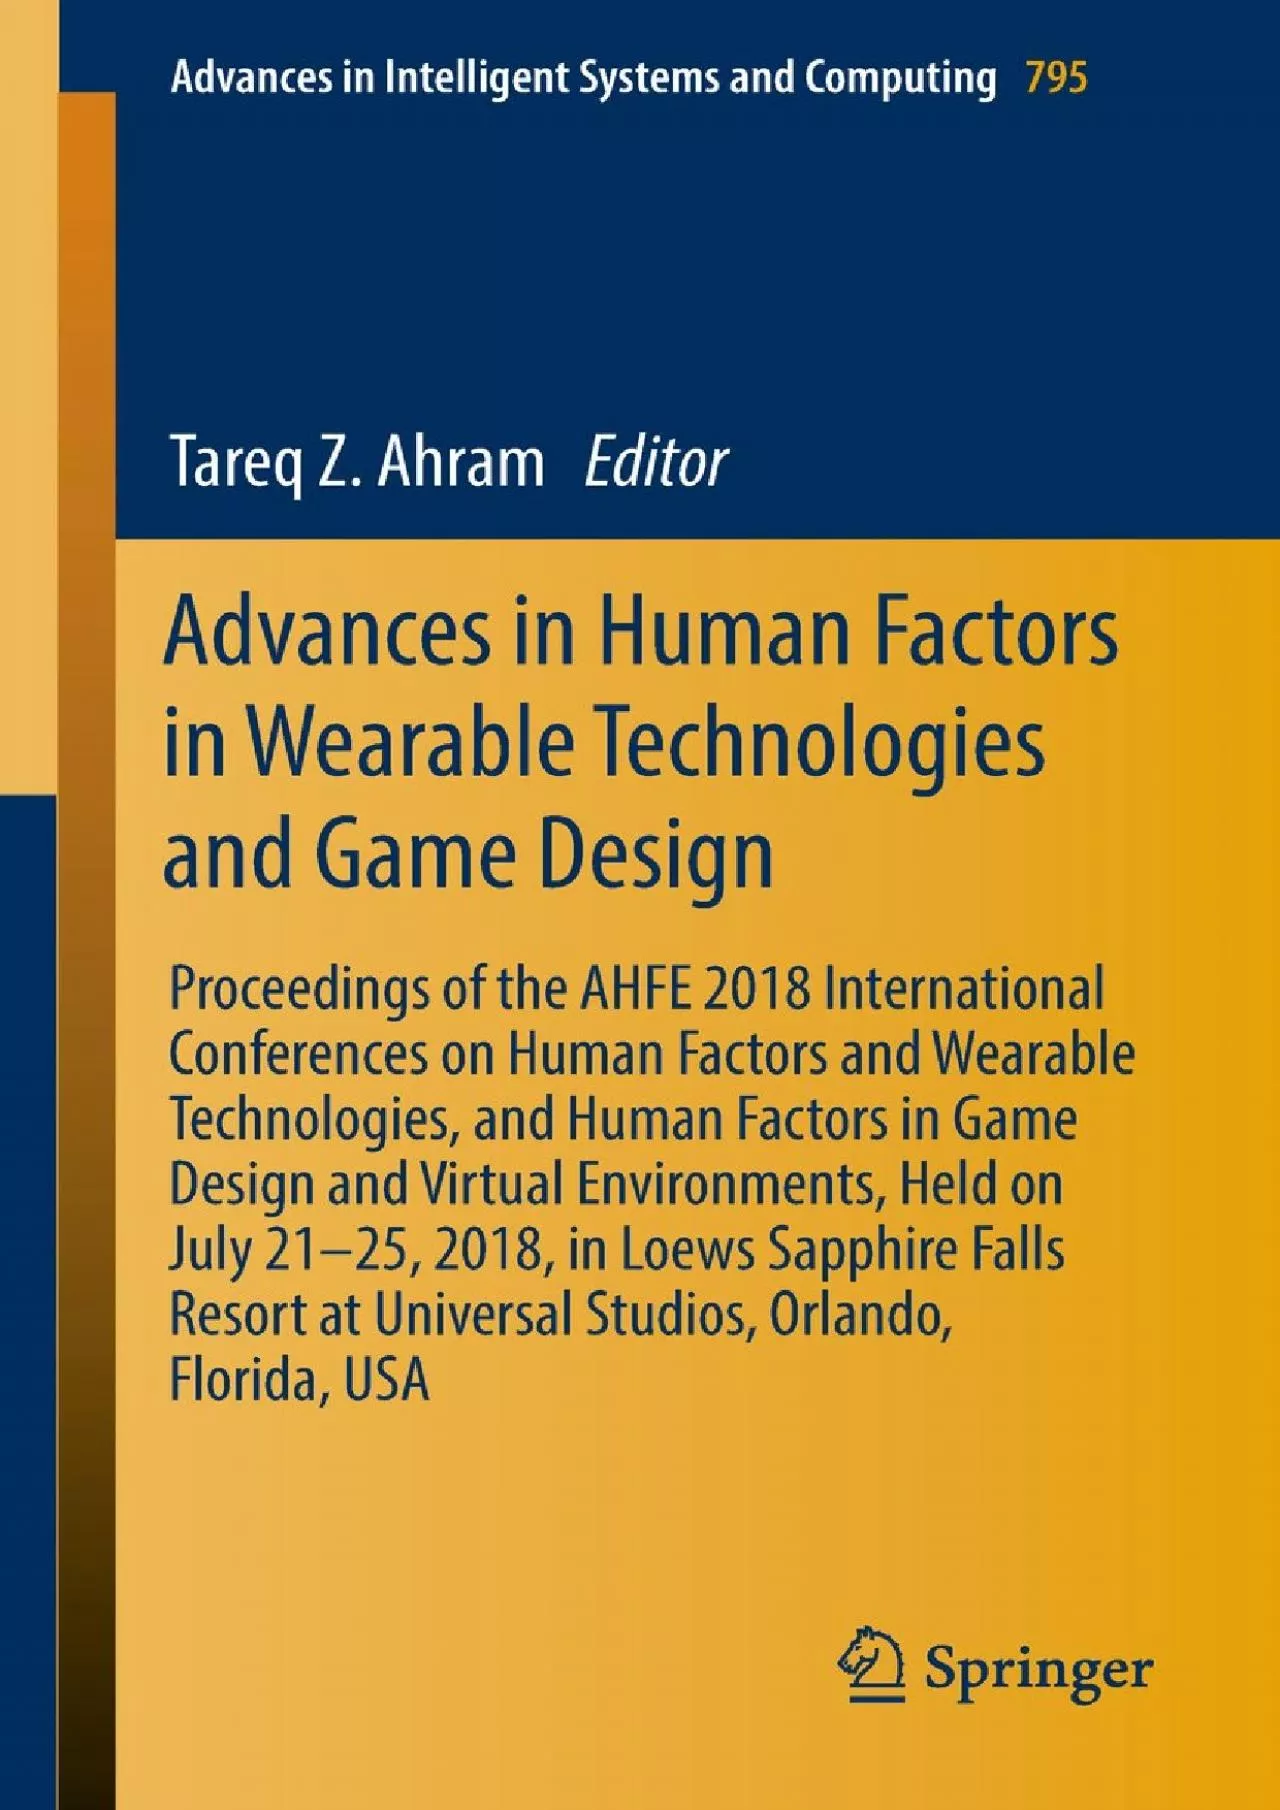 (EBOOK)-Advances in Human Factors in Wearable Technologies and Game Design Proceedings